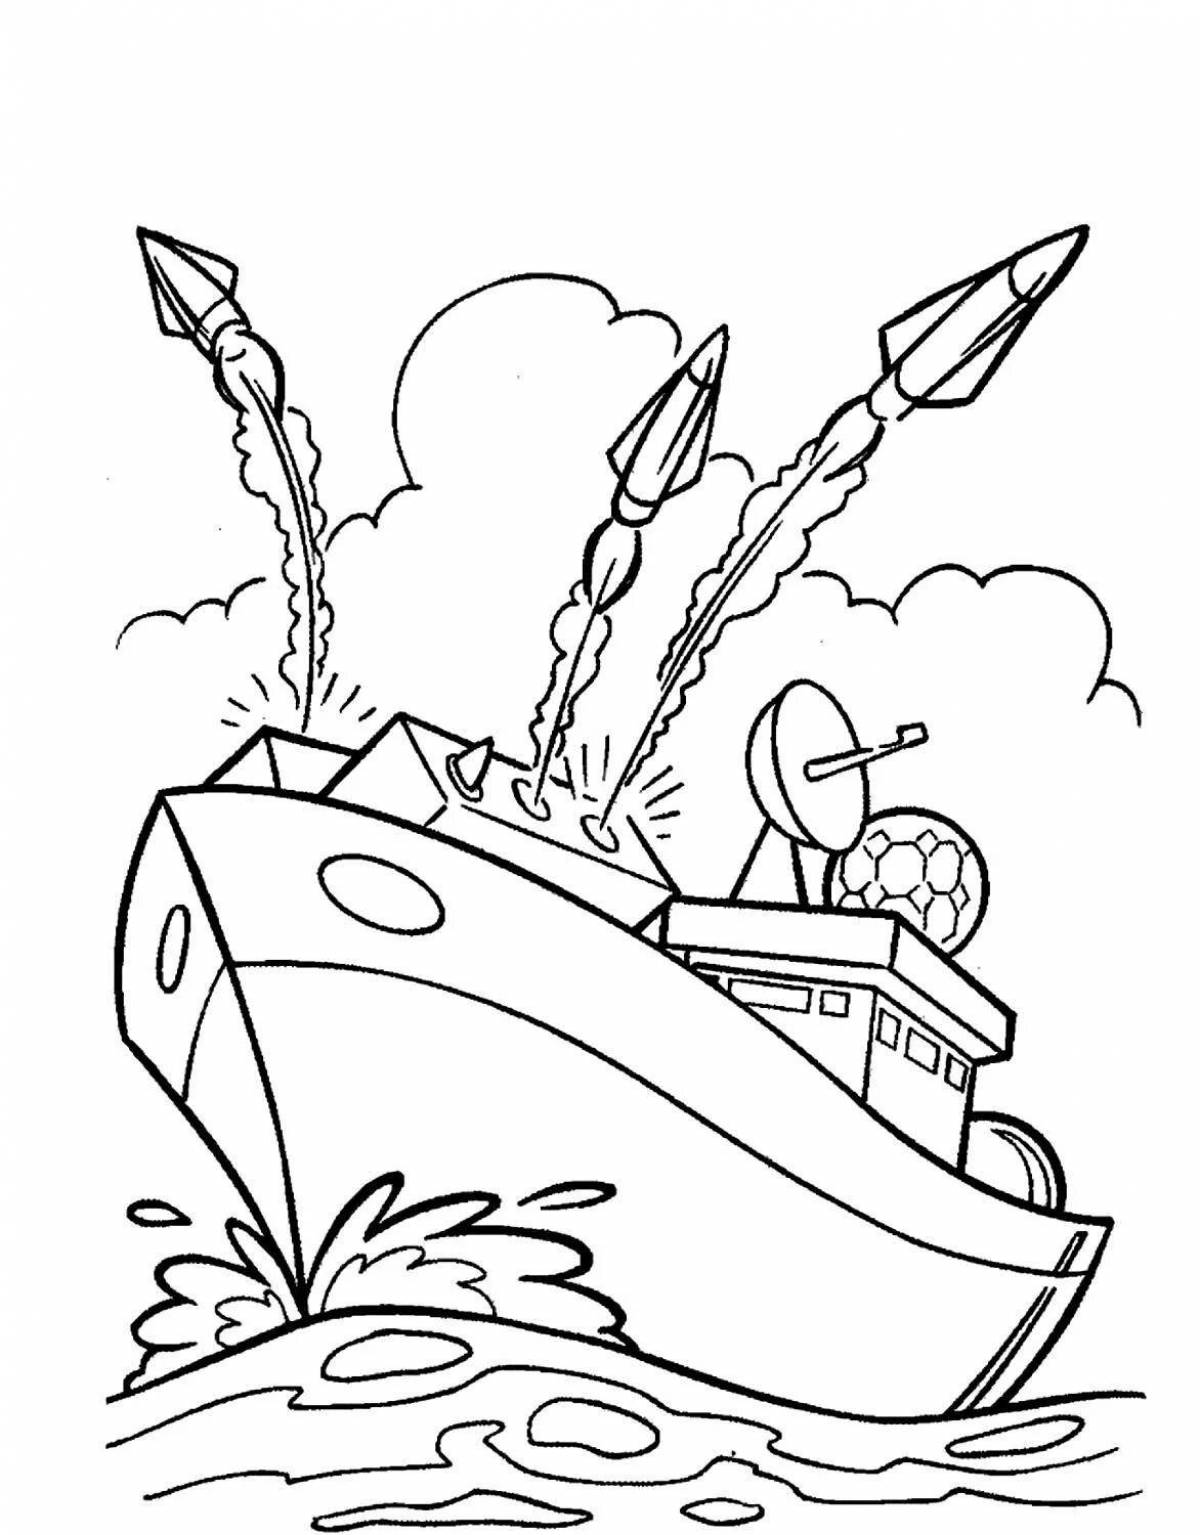 Fun warship coloring pages for kids